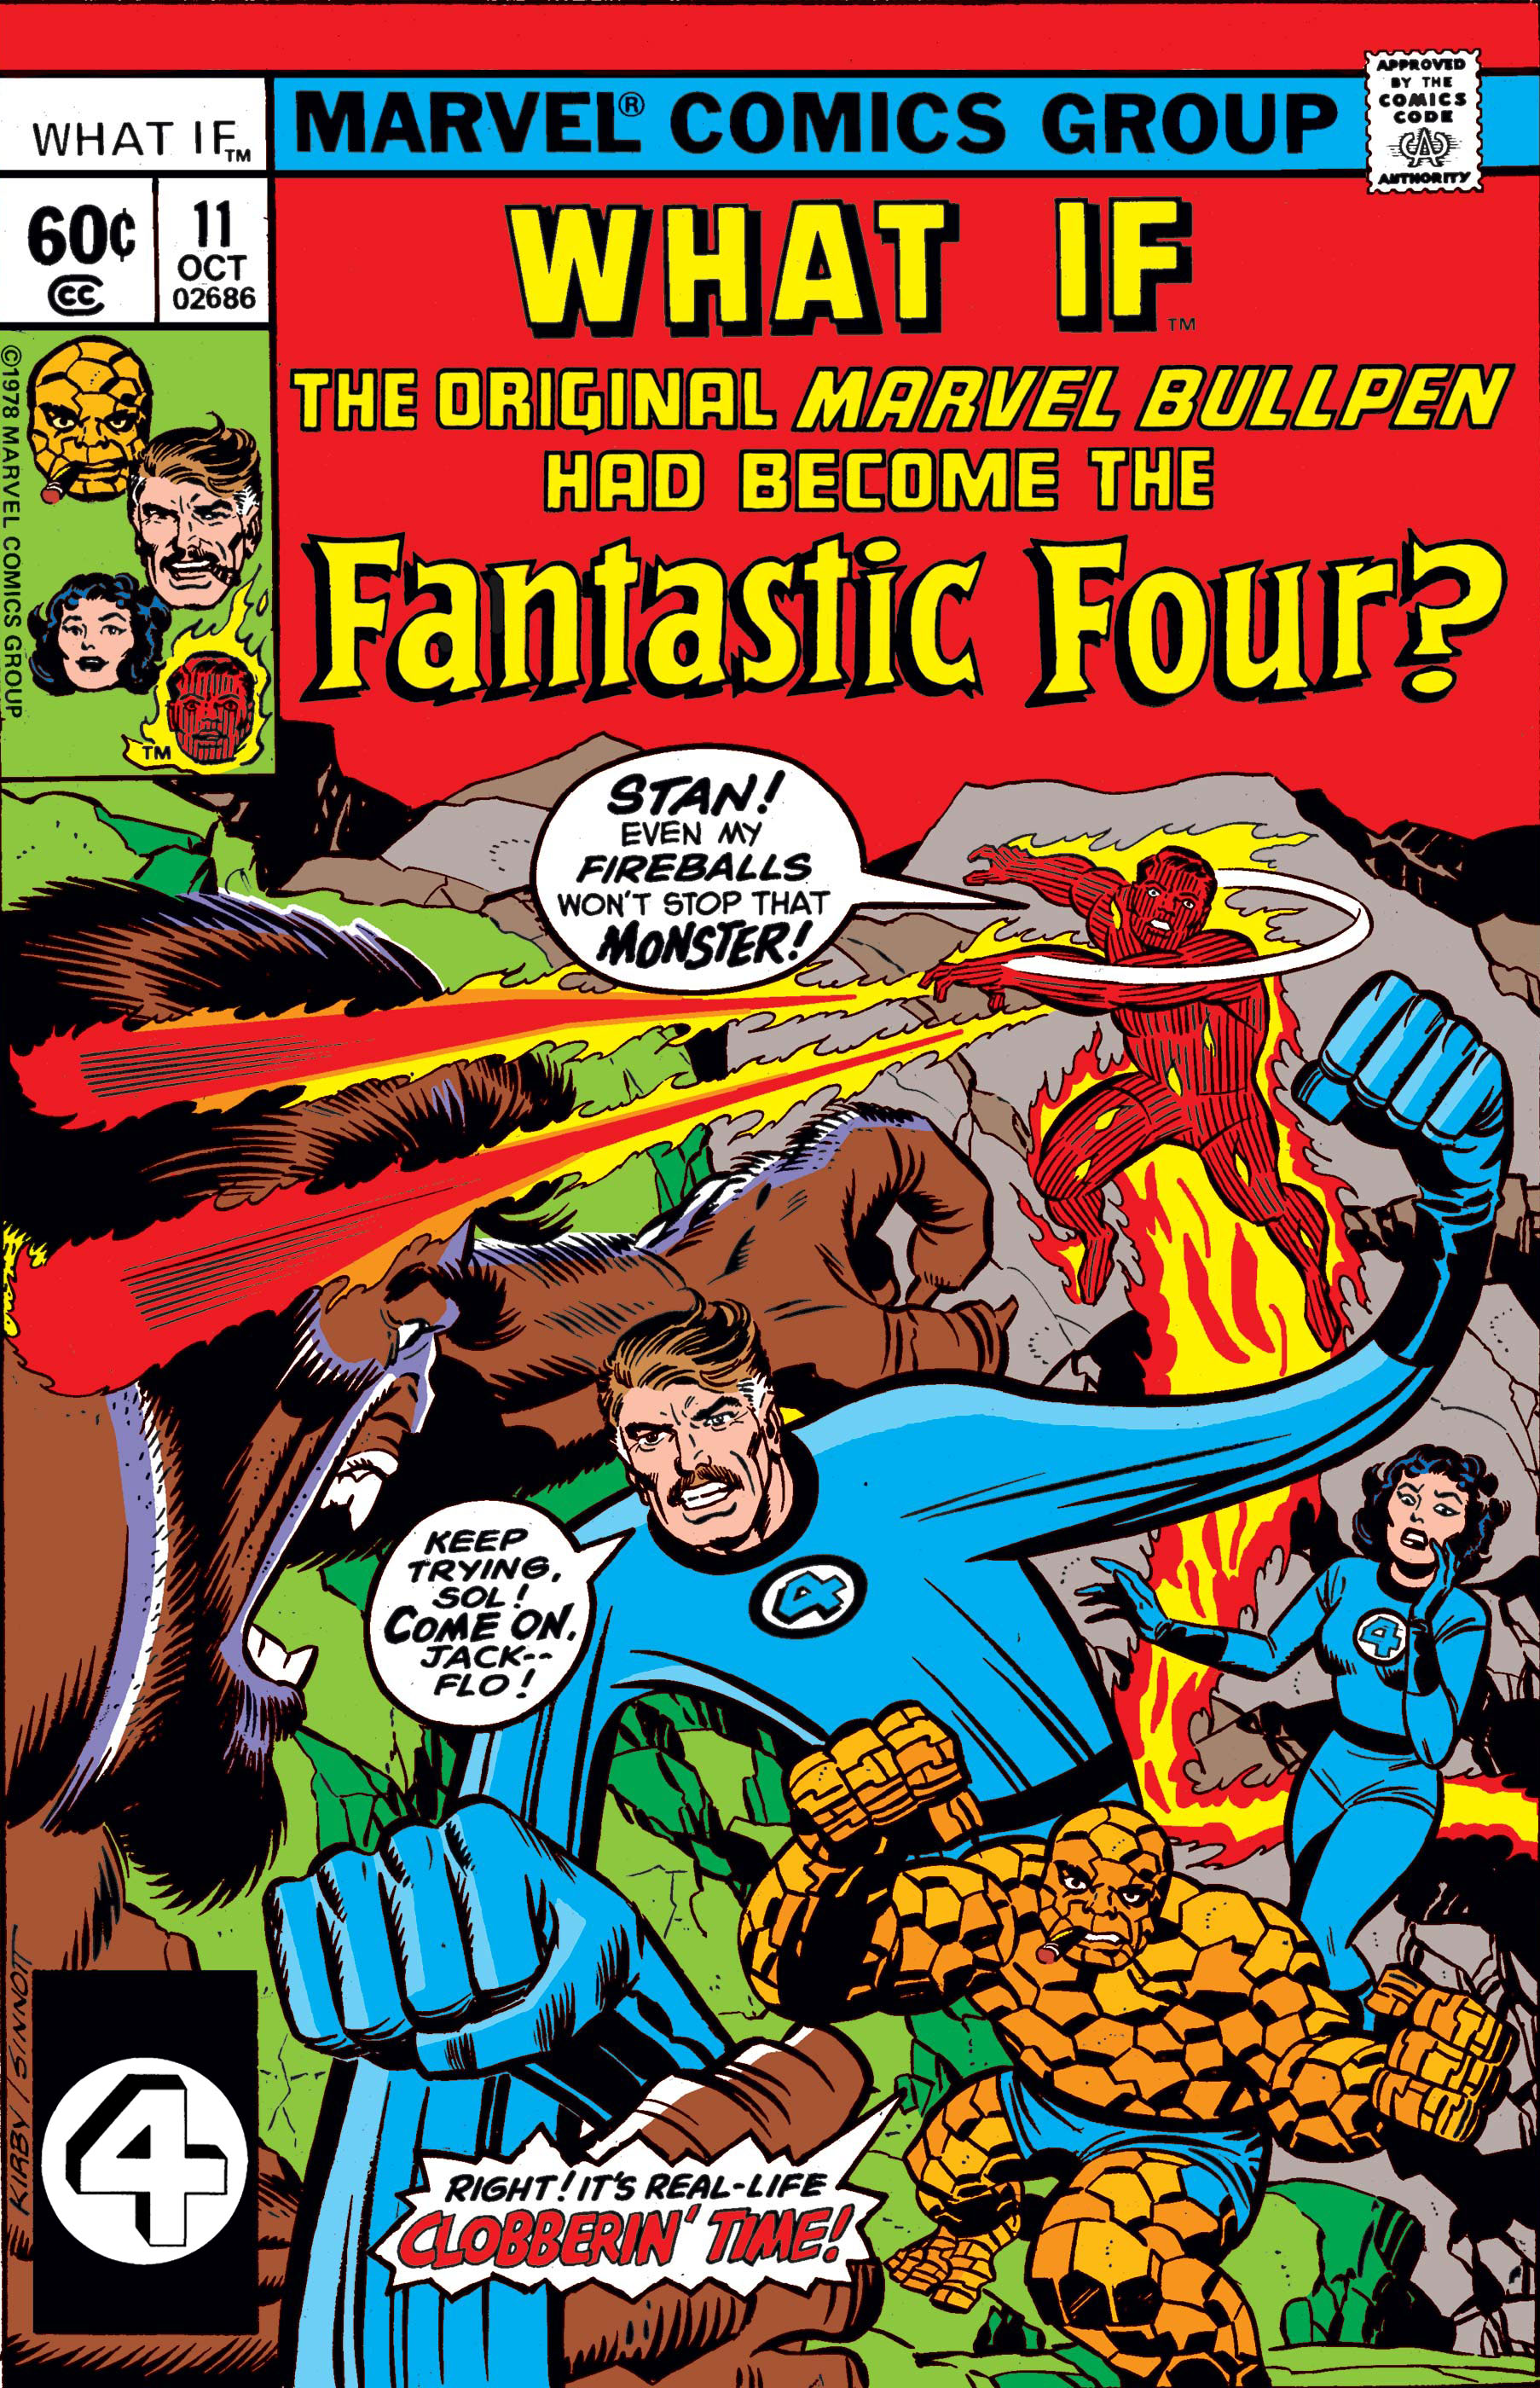 What If? (1977) #11